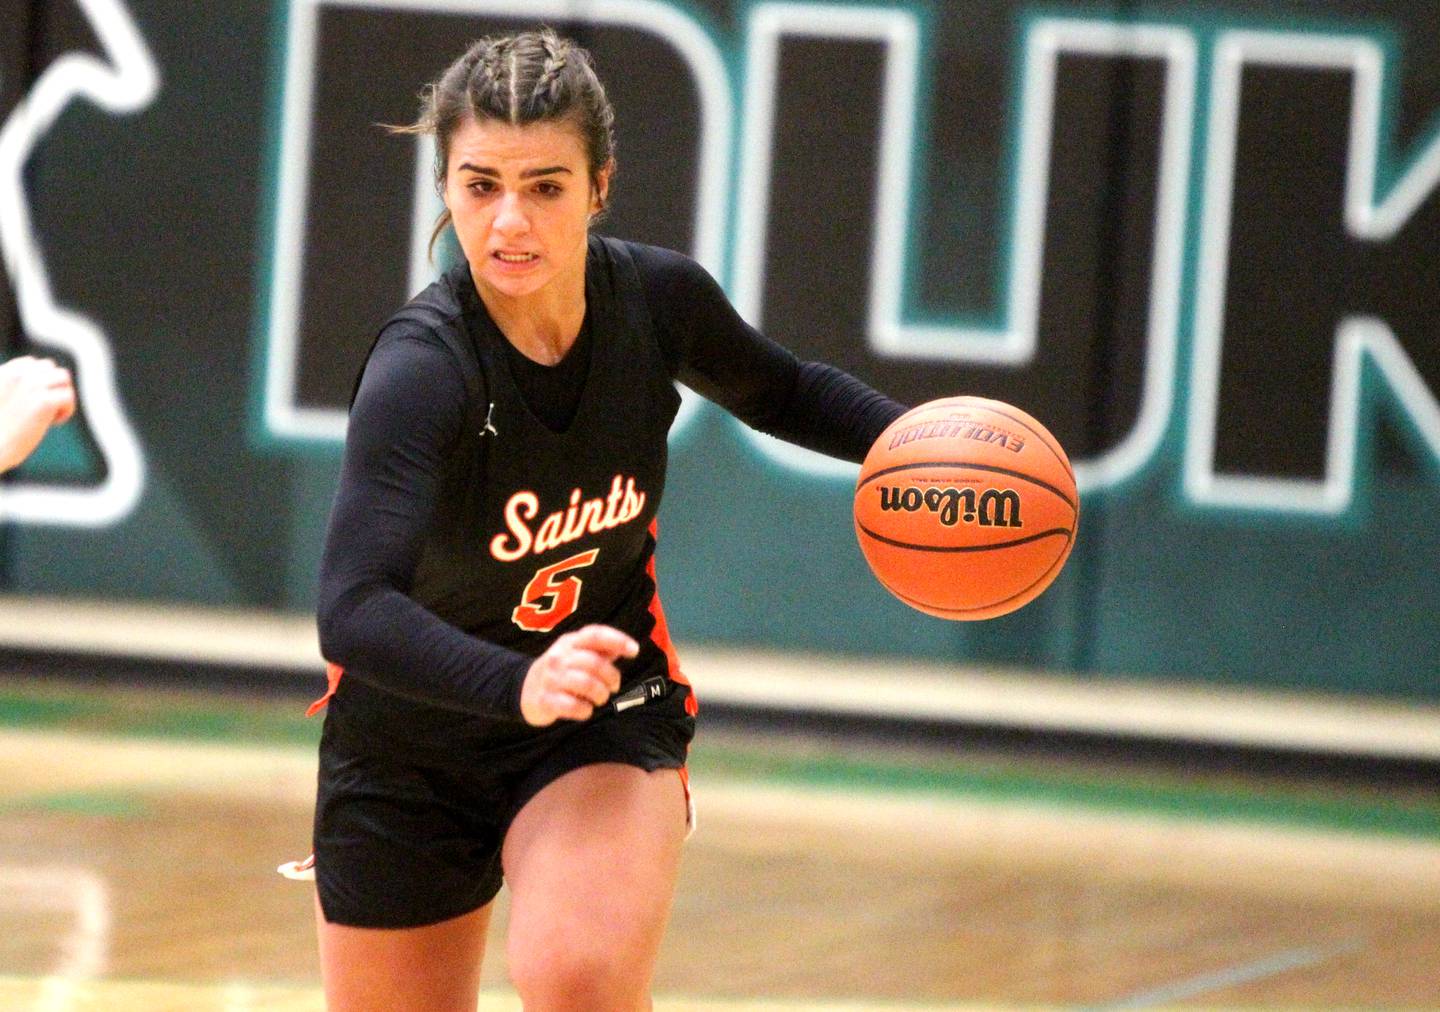 St. Charles East’s Alexis Diorio drives toward the basket during a game against York in the 11th Annual Thanksgiving Tournament in Elmhurst on Monday, Nov. 14, 2022.